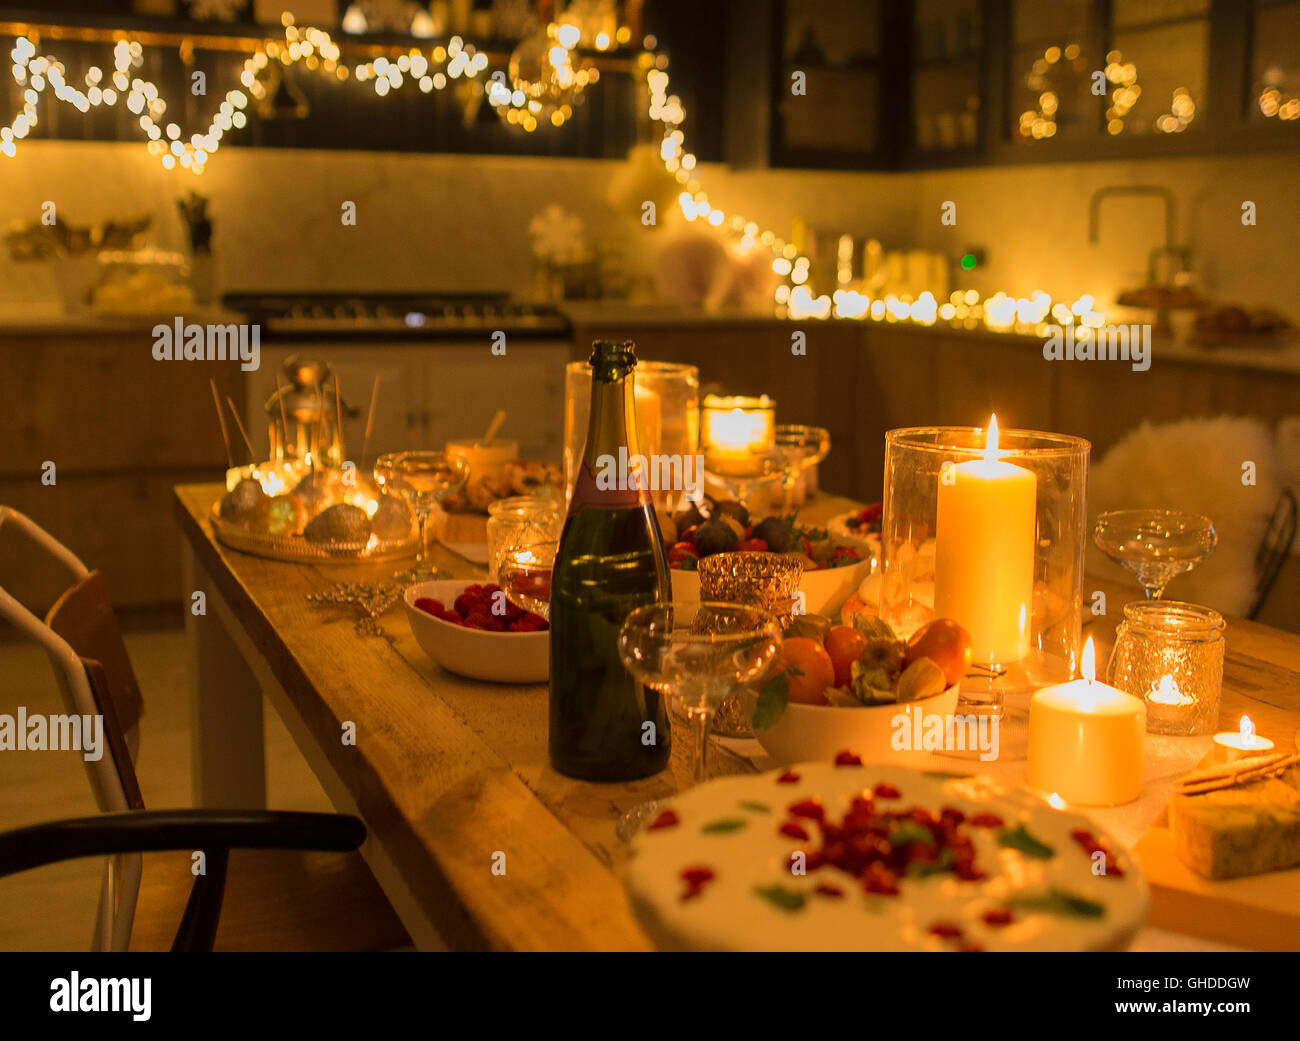 Champagne and desserts on candlelight Christmas table Stock Photo